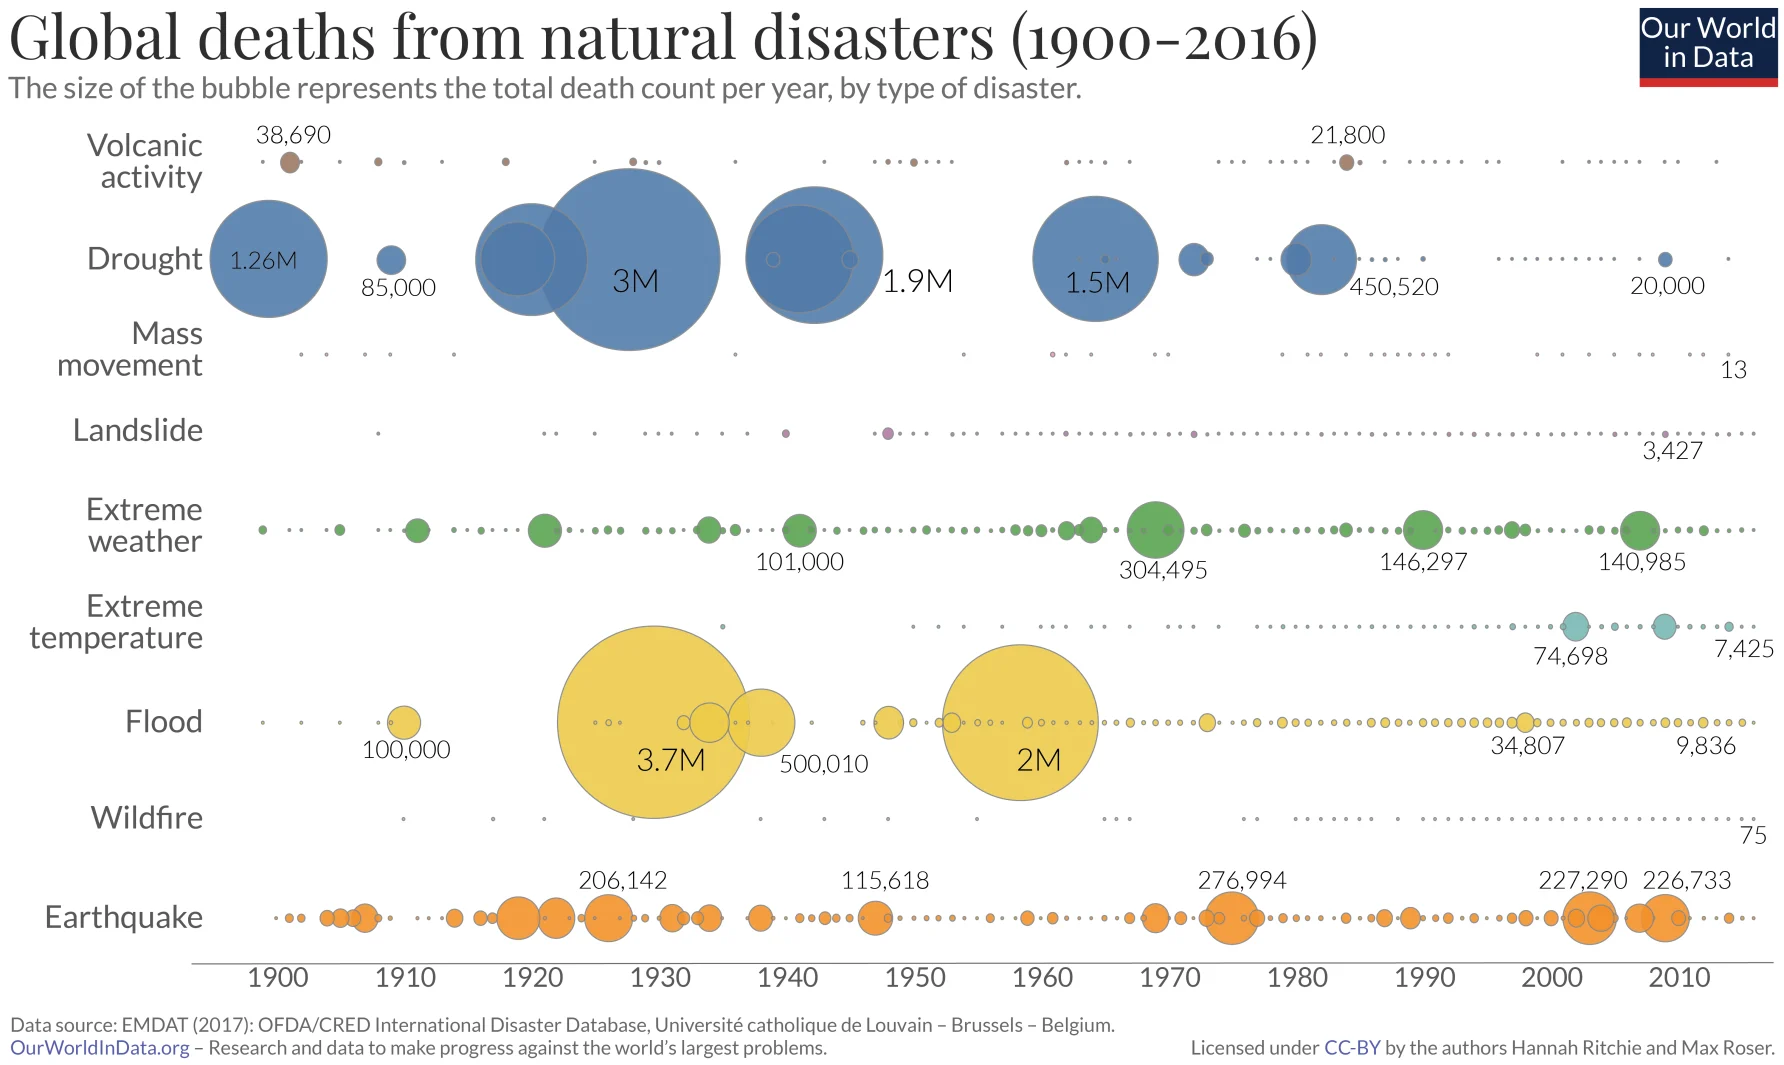 A graph showing global deaths from natural disasters from 1900 to 2016